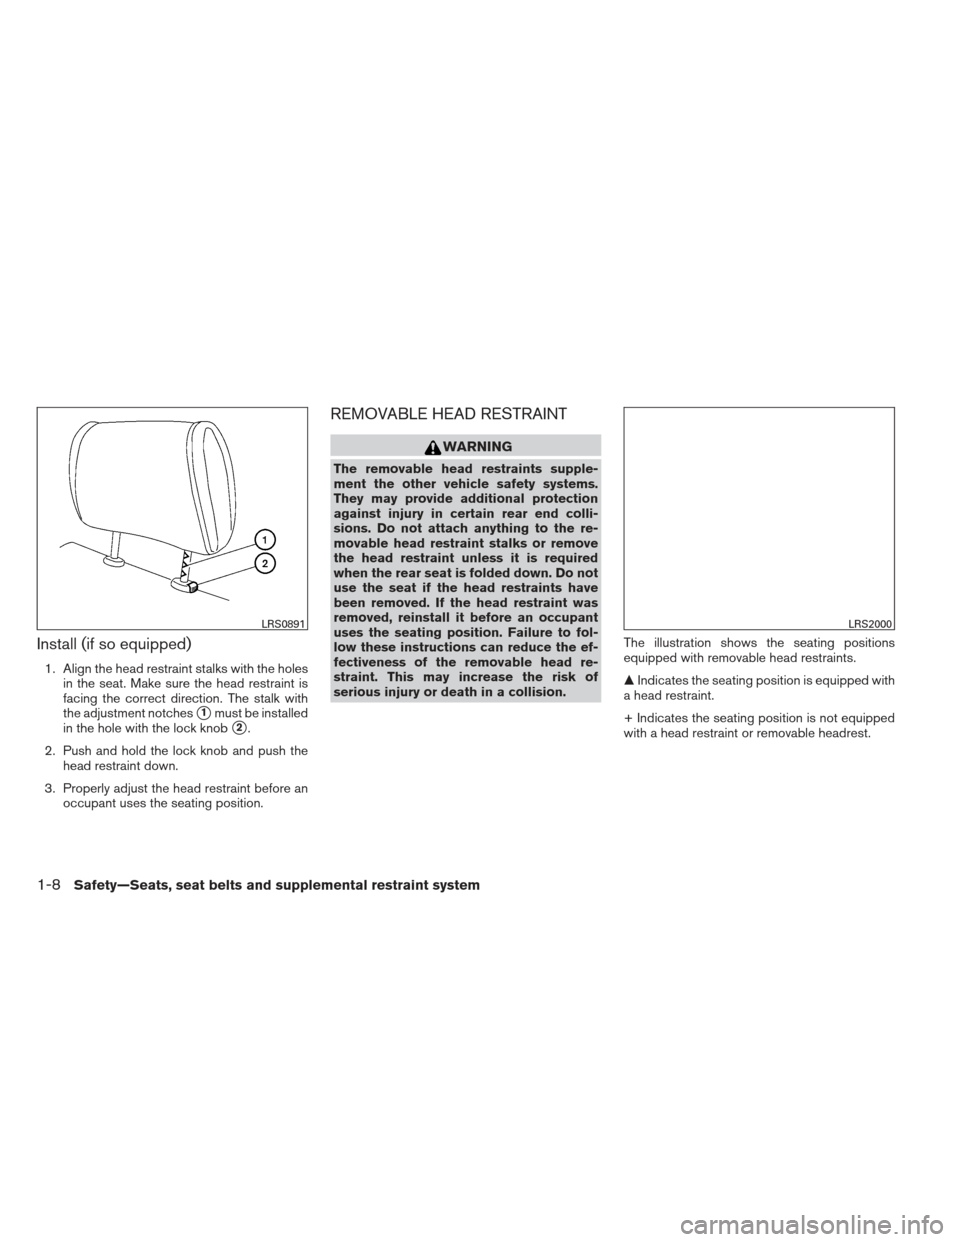 NISSAN VERSA SEDAN 2013 2.G Owners Manual Install (if so equipped)
1. Align the head restraint stalks with the holesin the seat. Make sure the head restraint is
facing the correct direction. The stalk with
the adjustment notches
1must be ins